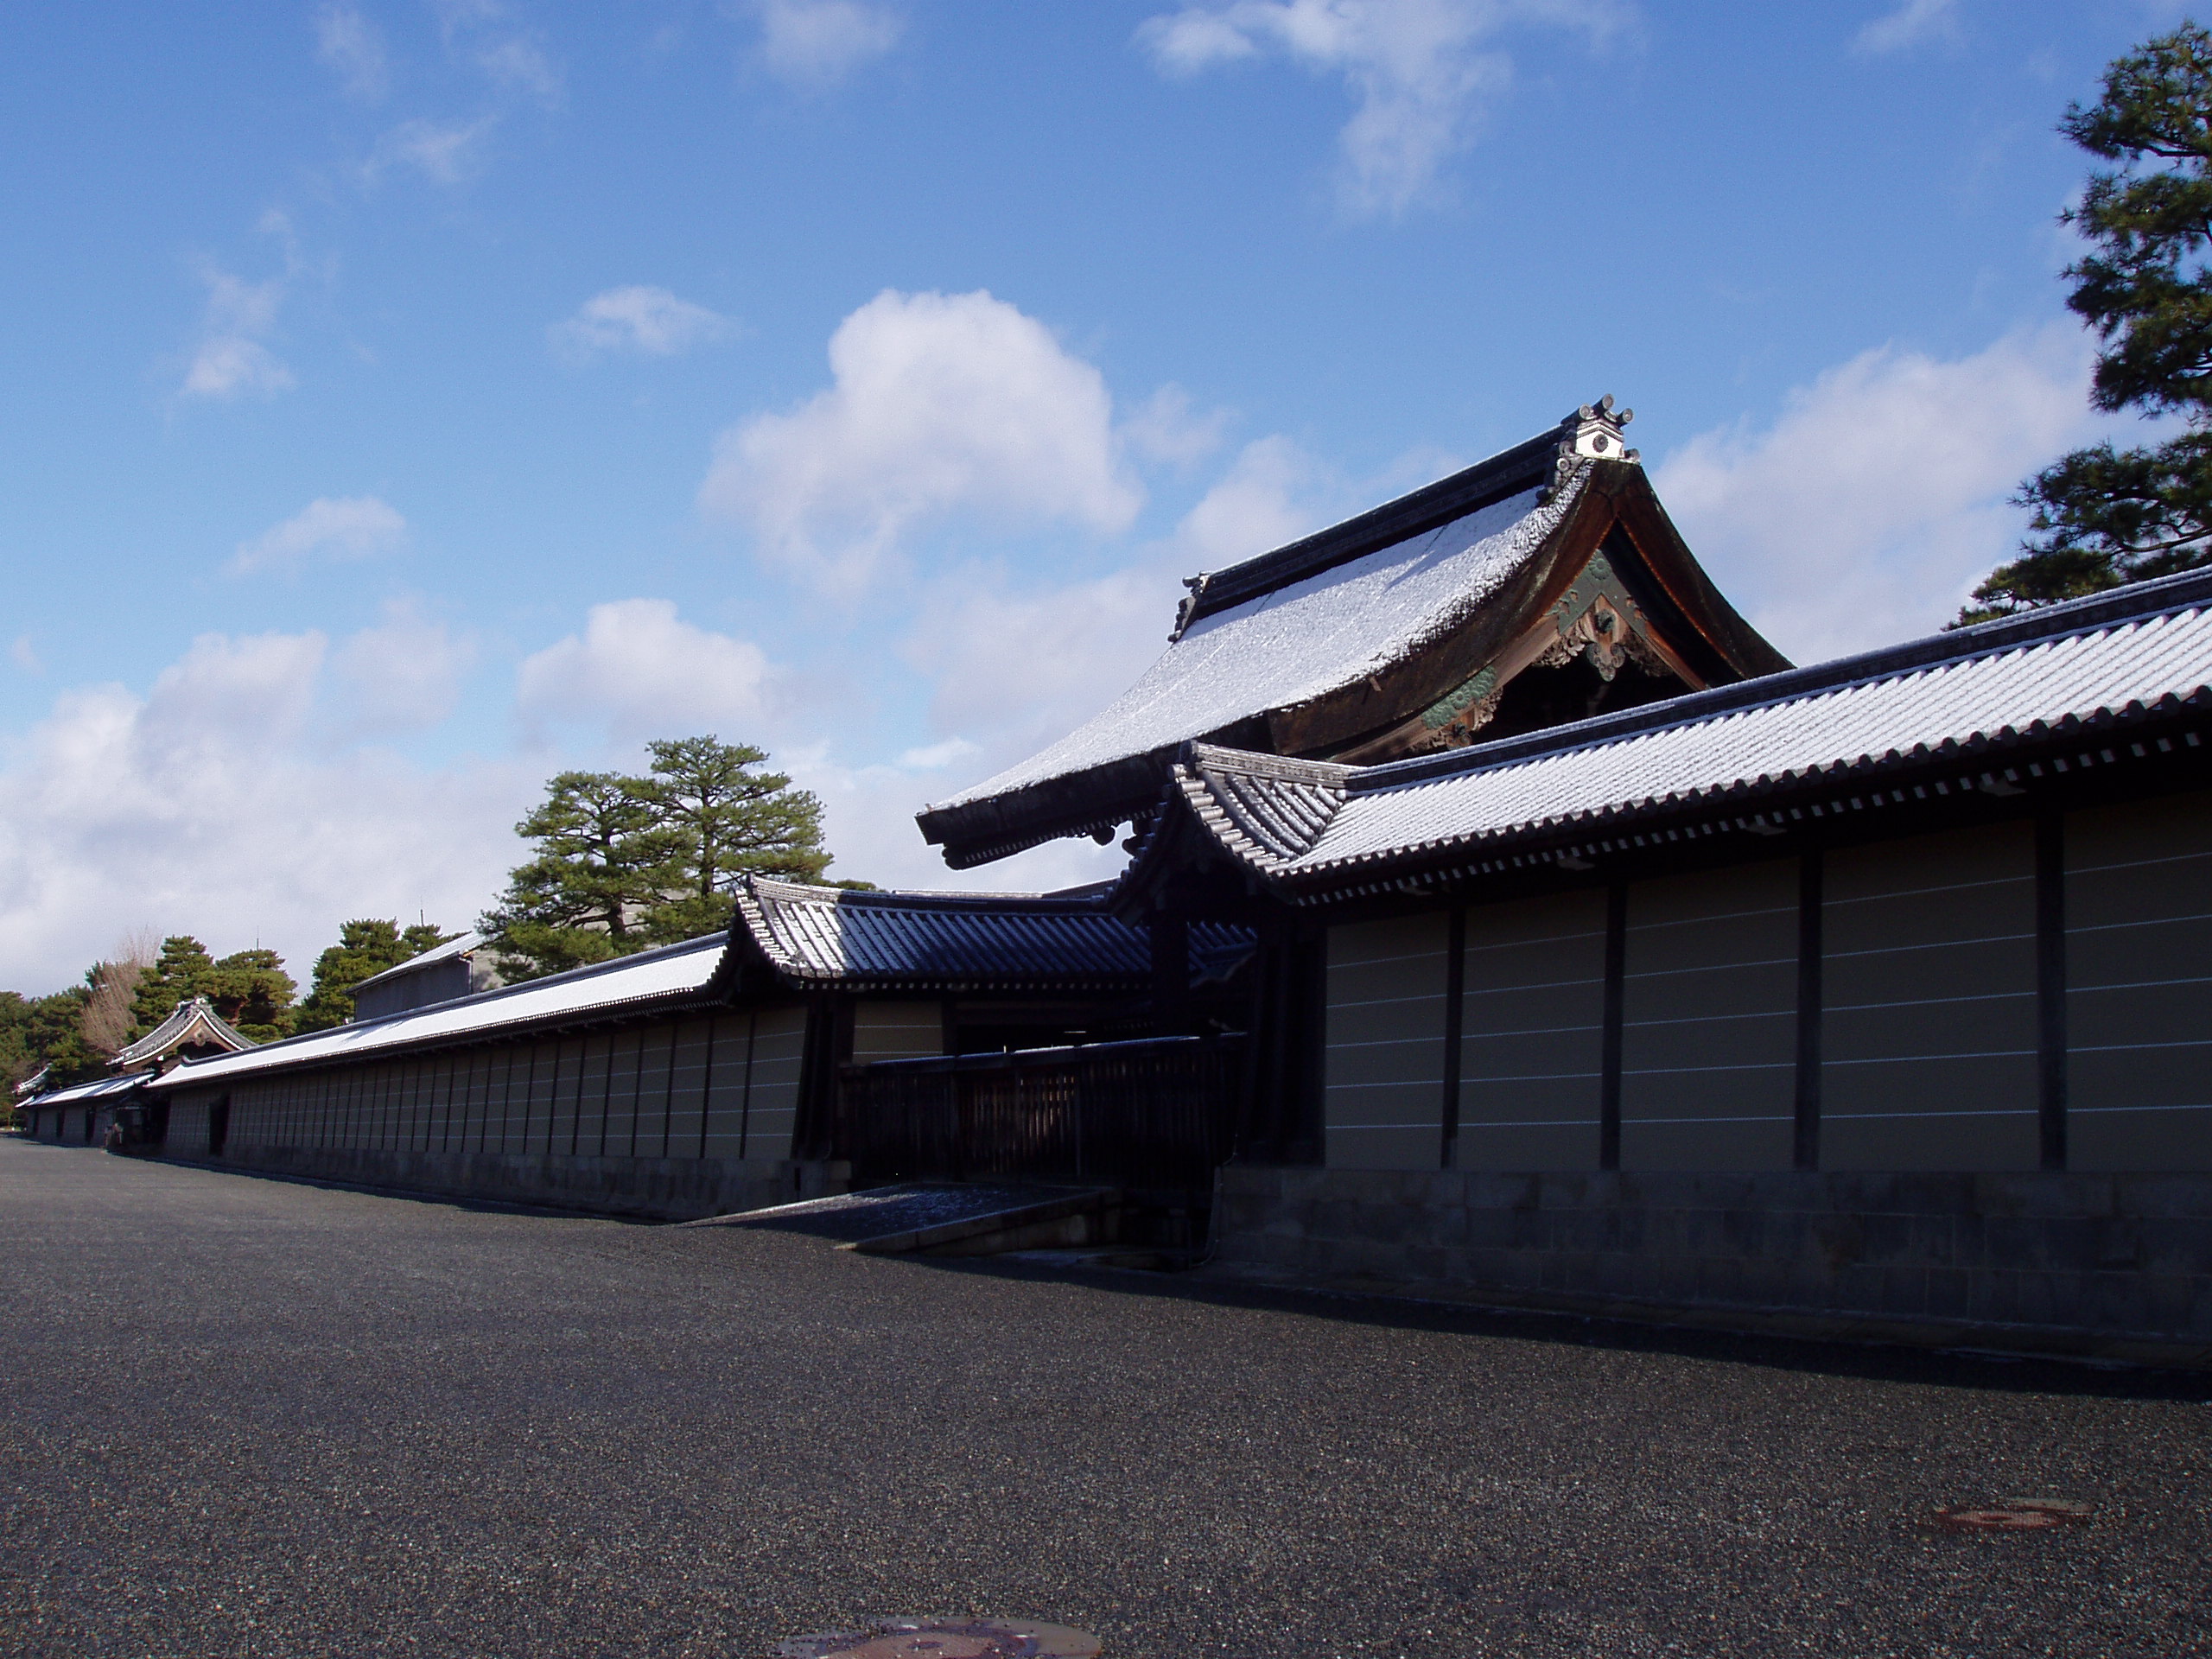 Wall surrounding the Imperial Palace in Kyoto